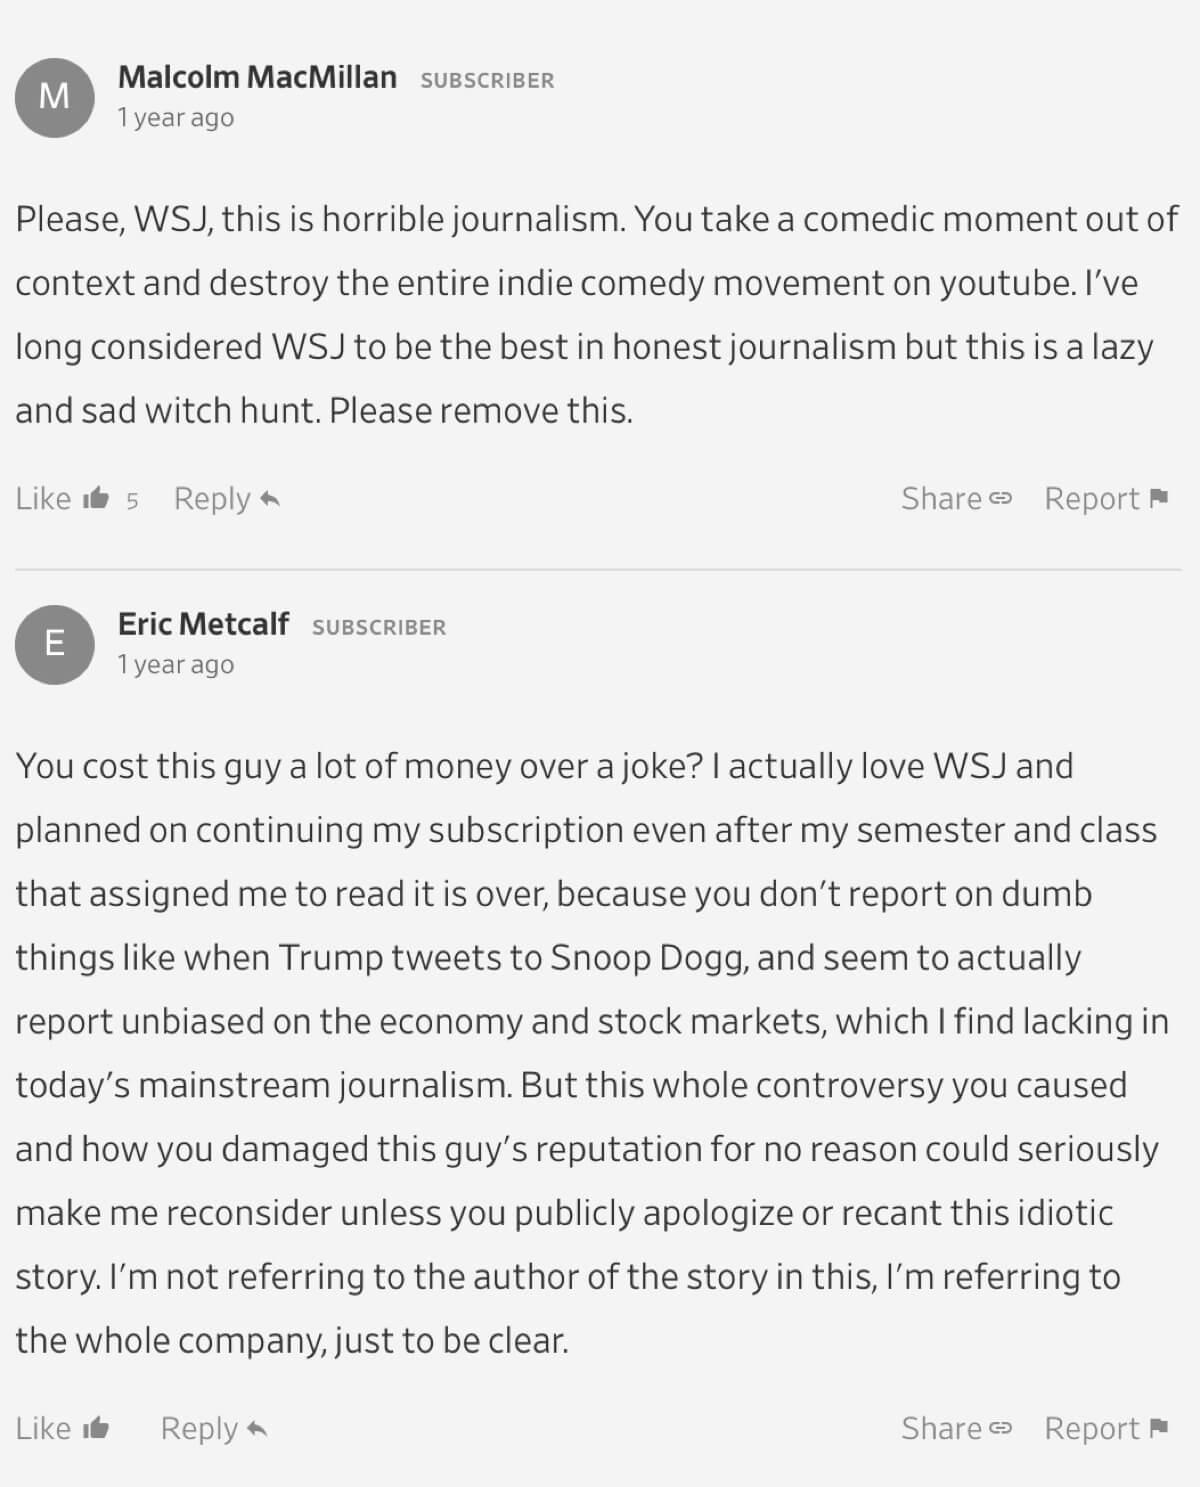 A critical comment on The Wall Street Journal’s article about PewDiePie.